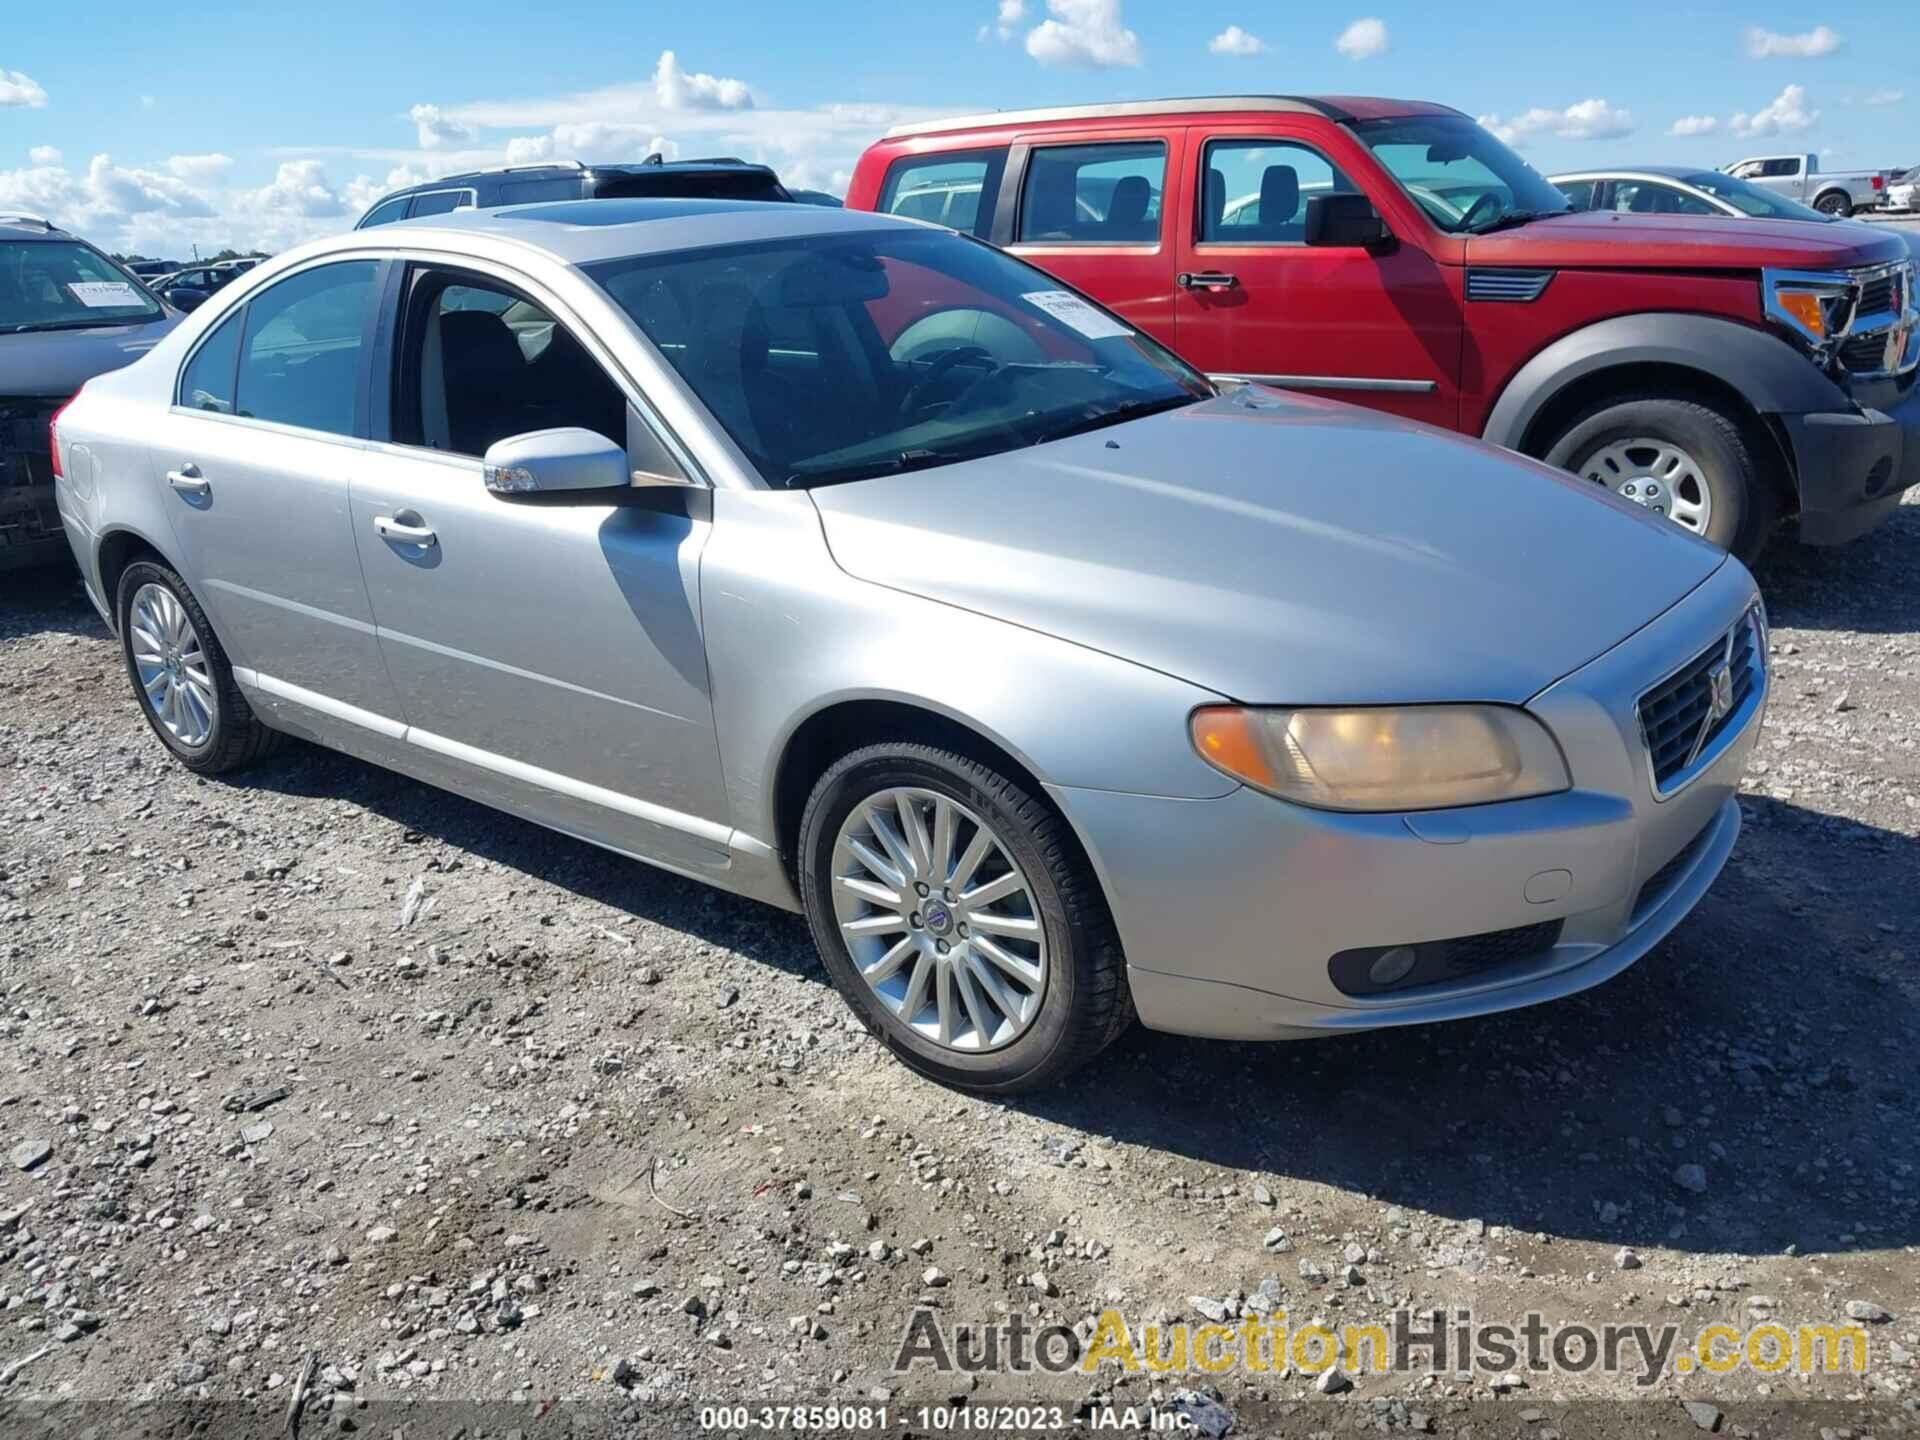 VOLVO S80 3.2L, YV1AS982381079169